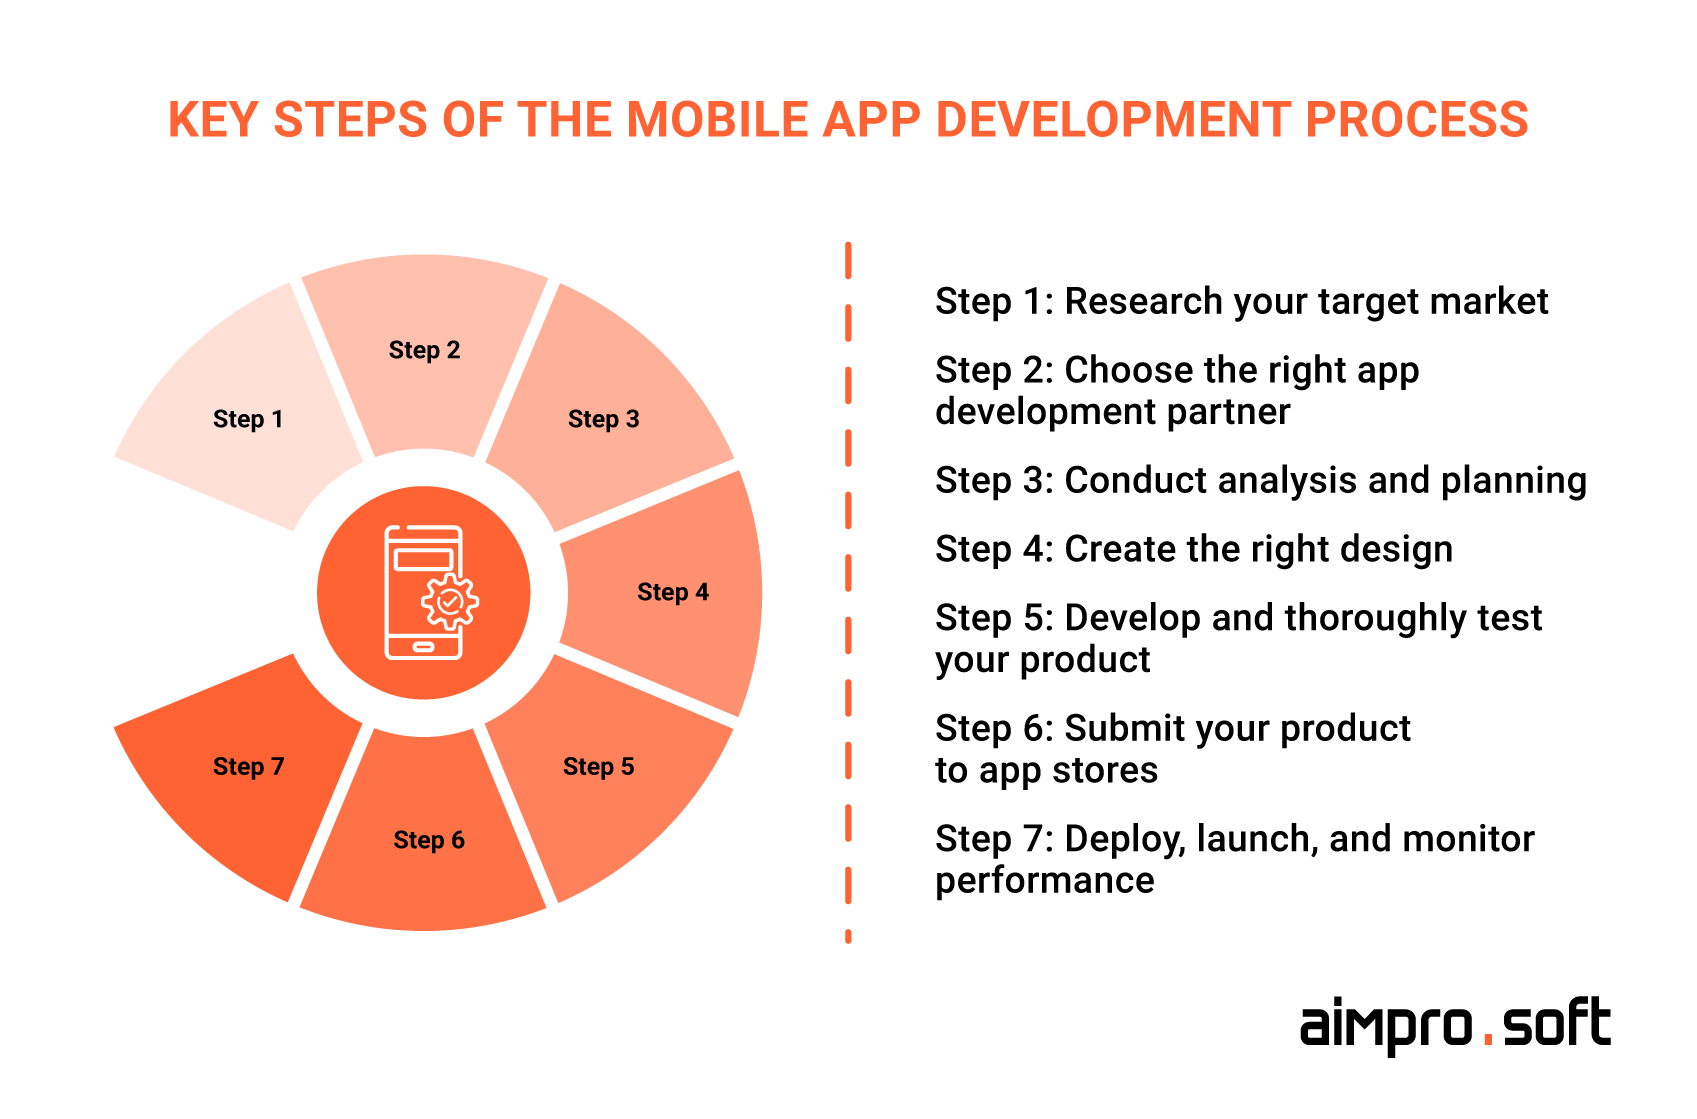 Key stages for developing a mobile application